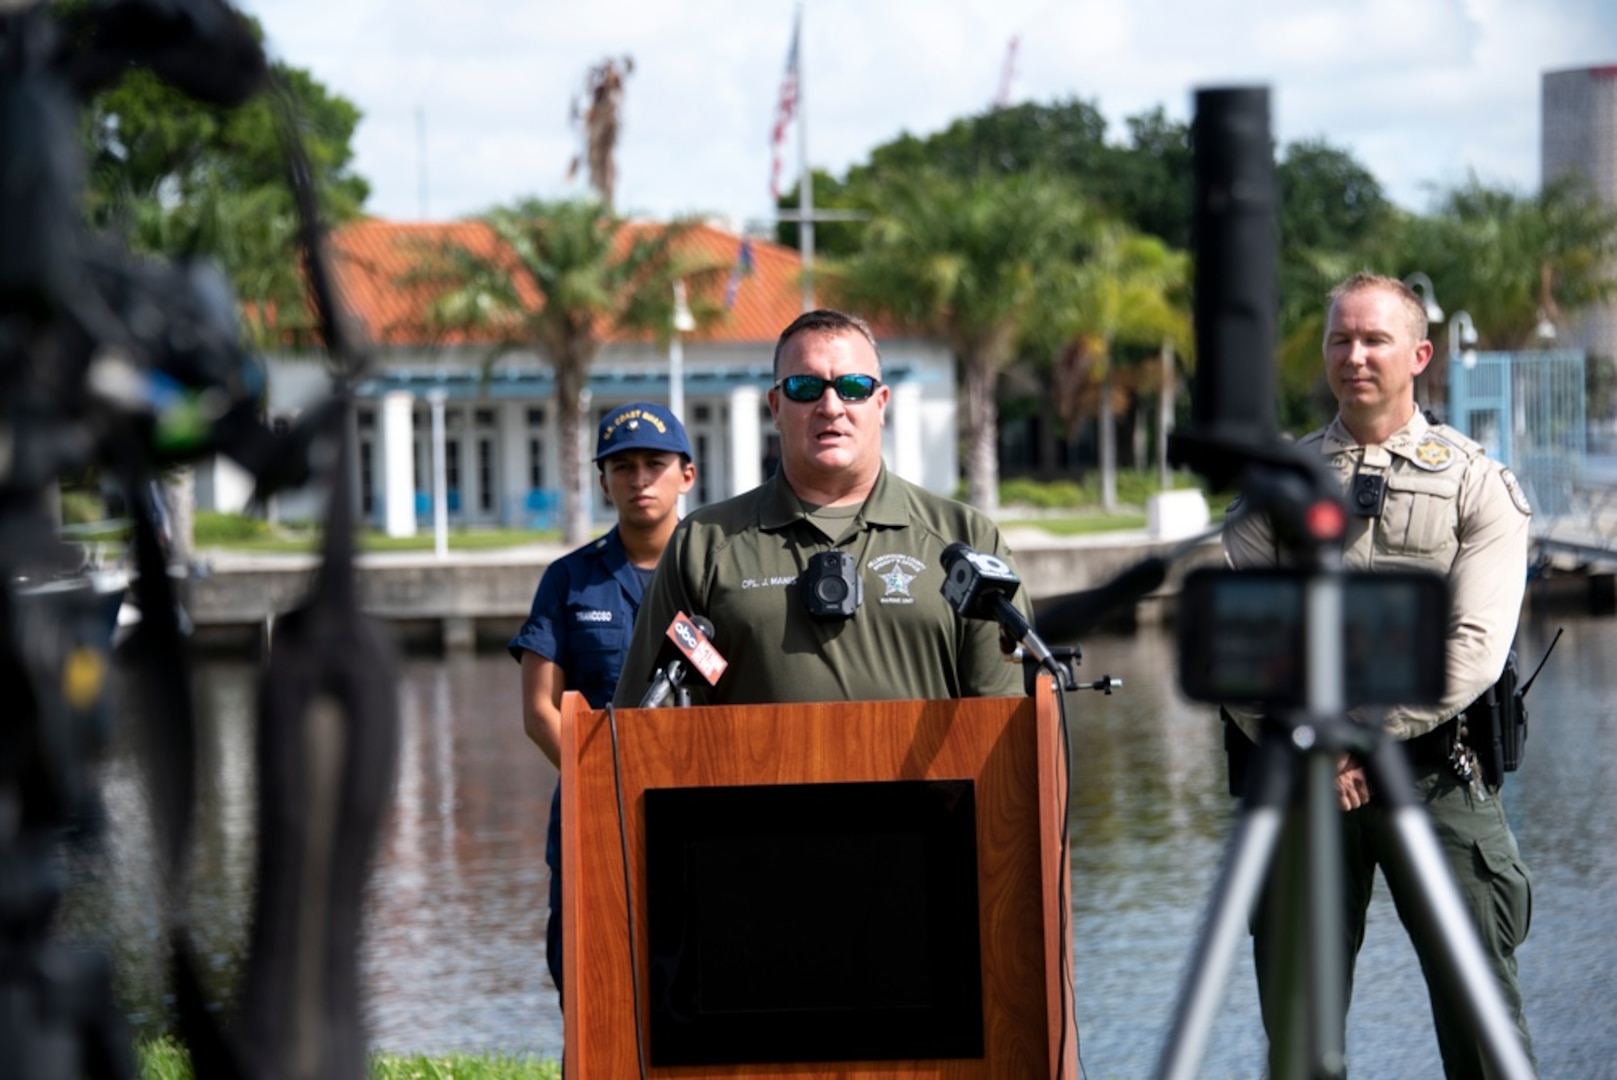 Hillsborough County Sheriff’s Office Cpl. Jeramy Manis speaks to the media about Operation Dry Water and boater safety, Tampa, Florida, July 1, 2021. Operation Dry Water is a national campaign that warns boaters of the dangers of boating under the influence. The Coast Guard and interagency partners Florida Fish and Wildlife Conservation Commission and Hillsborough County Sheriff’s Office held the press event as part of efforts to keep the public safe on the water for the Fourth of July holiday, stressing the importance of wearing a life vest, knowing how to safely operate a vessel, and never boating under the influence. (DoD photo by Coast Guard Petty Officer 1st Class Lisa Ferdinando)